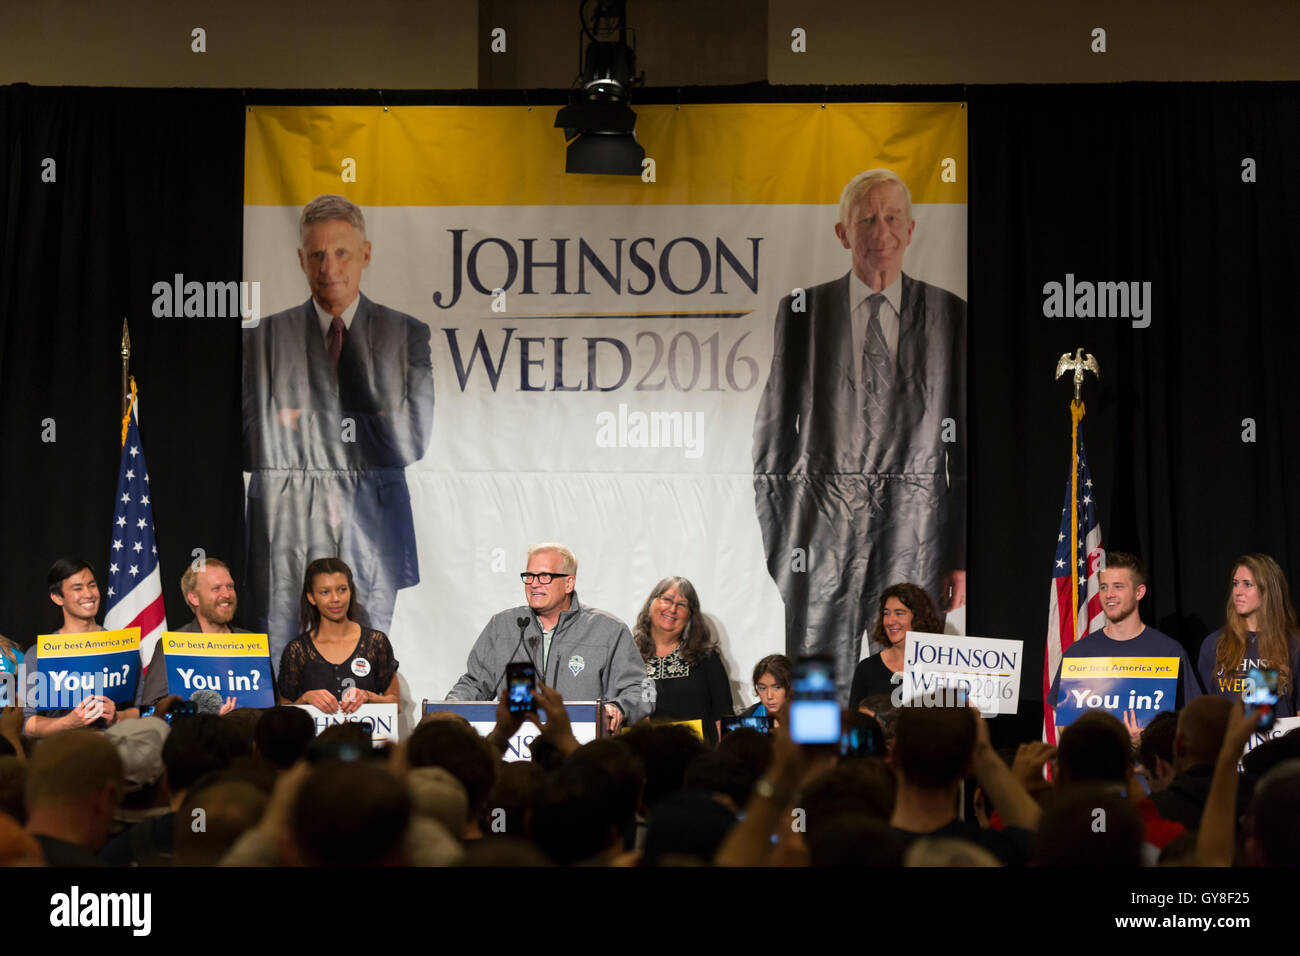 Seattle, Washington: Drew Carey addresses supporters at the Seattle Rally with Governors Johnson & Weld at the Sheraton Seattle Hotel. Credit:  Paul Gordon/Alamy Live News Stock Photo